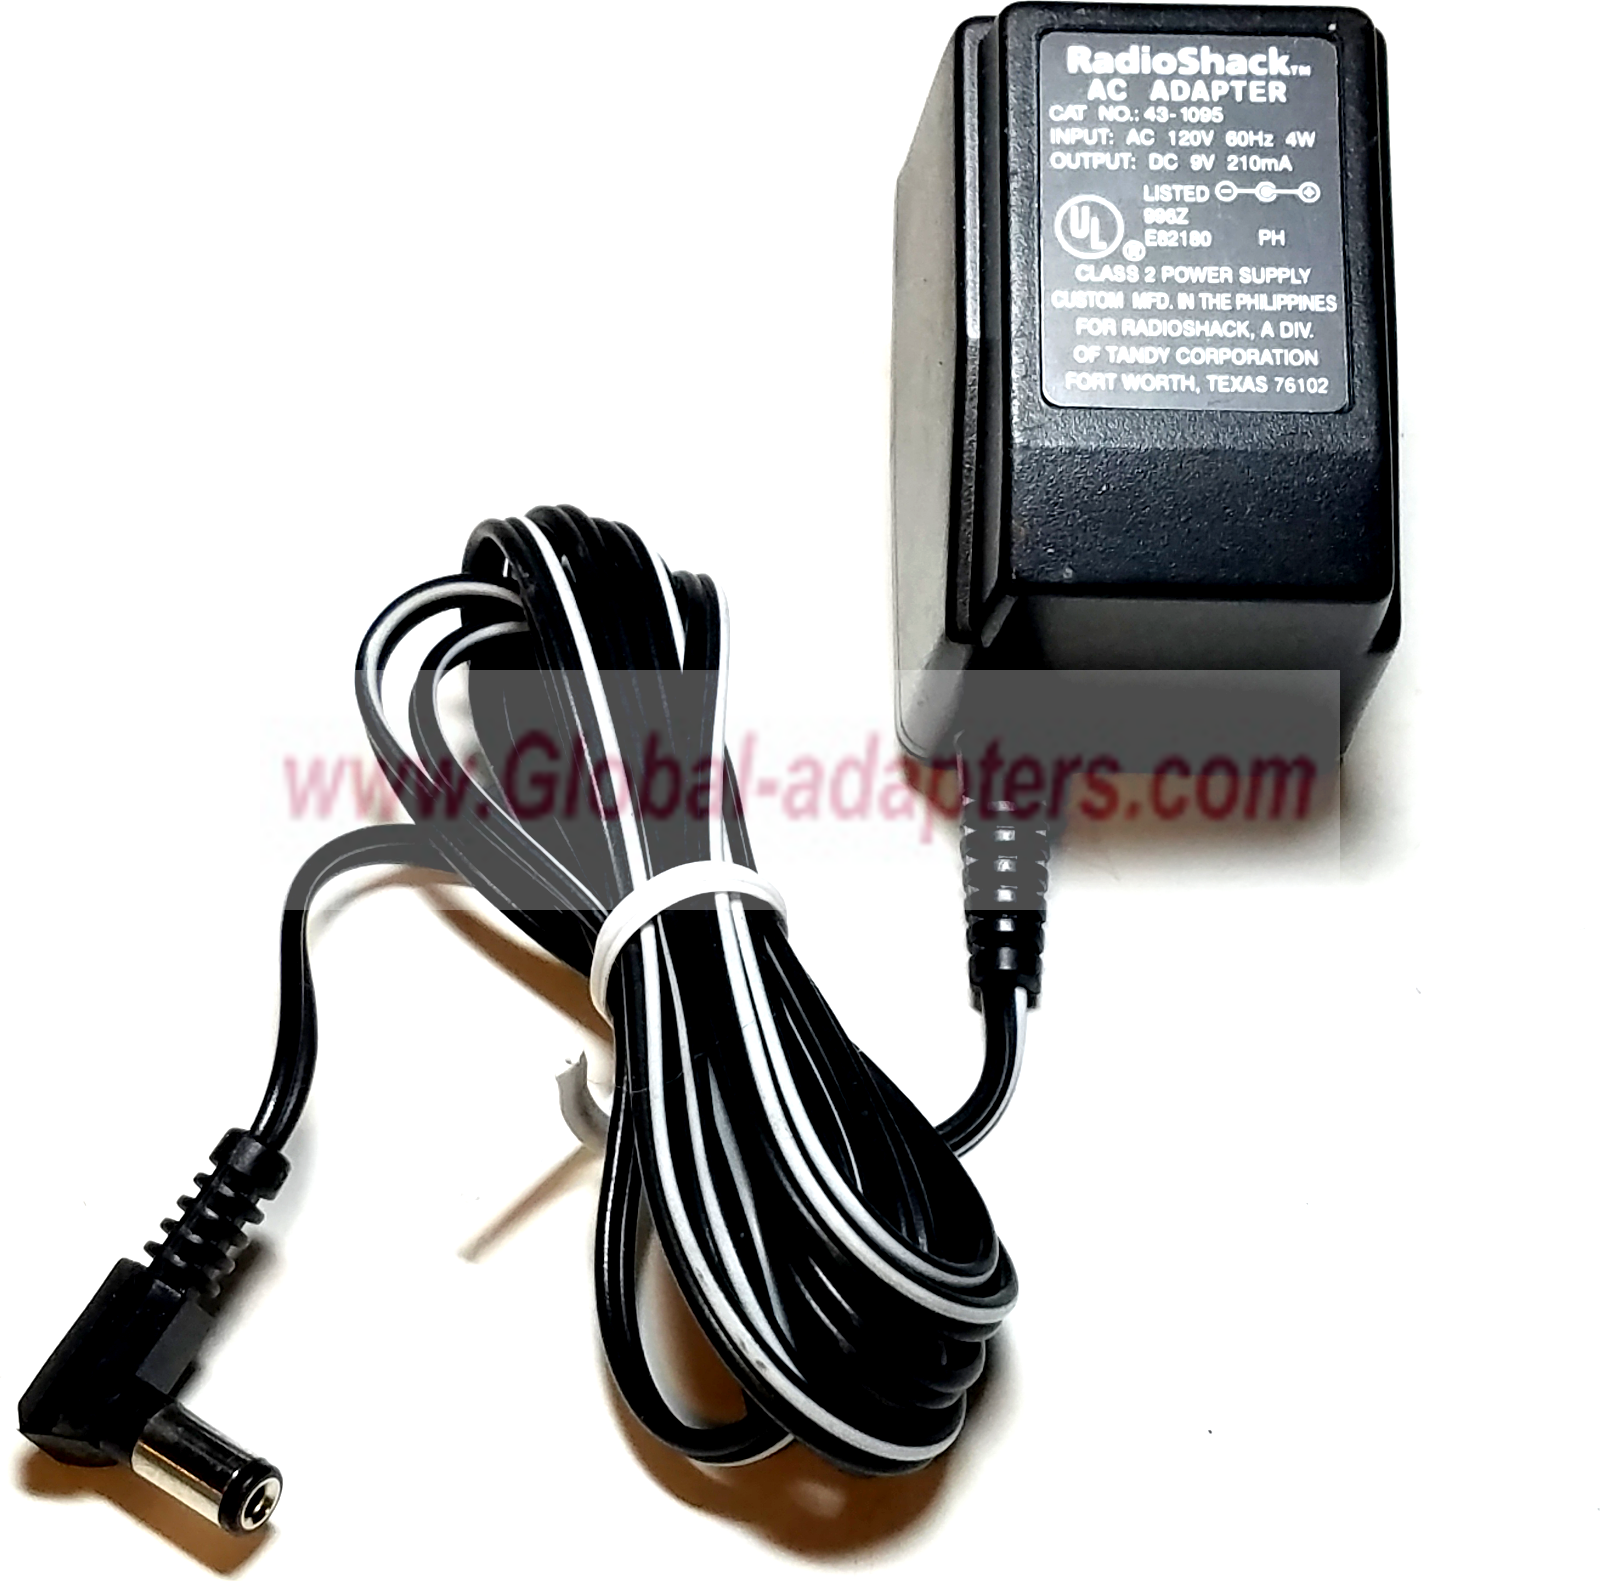 New 9V 210mA Radio Shack 43-1095 Class 2 Power Supply AC Adapter Charger